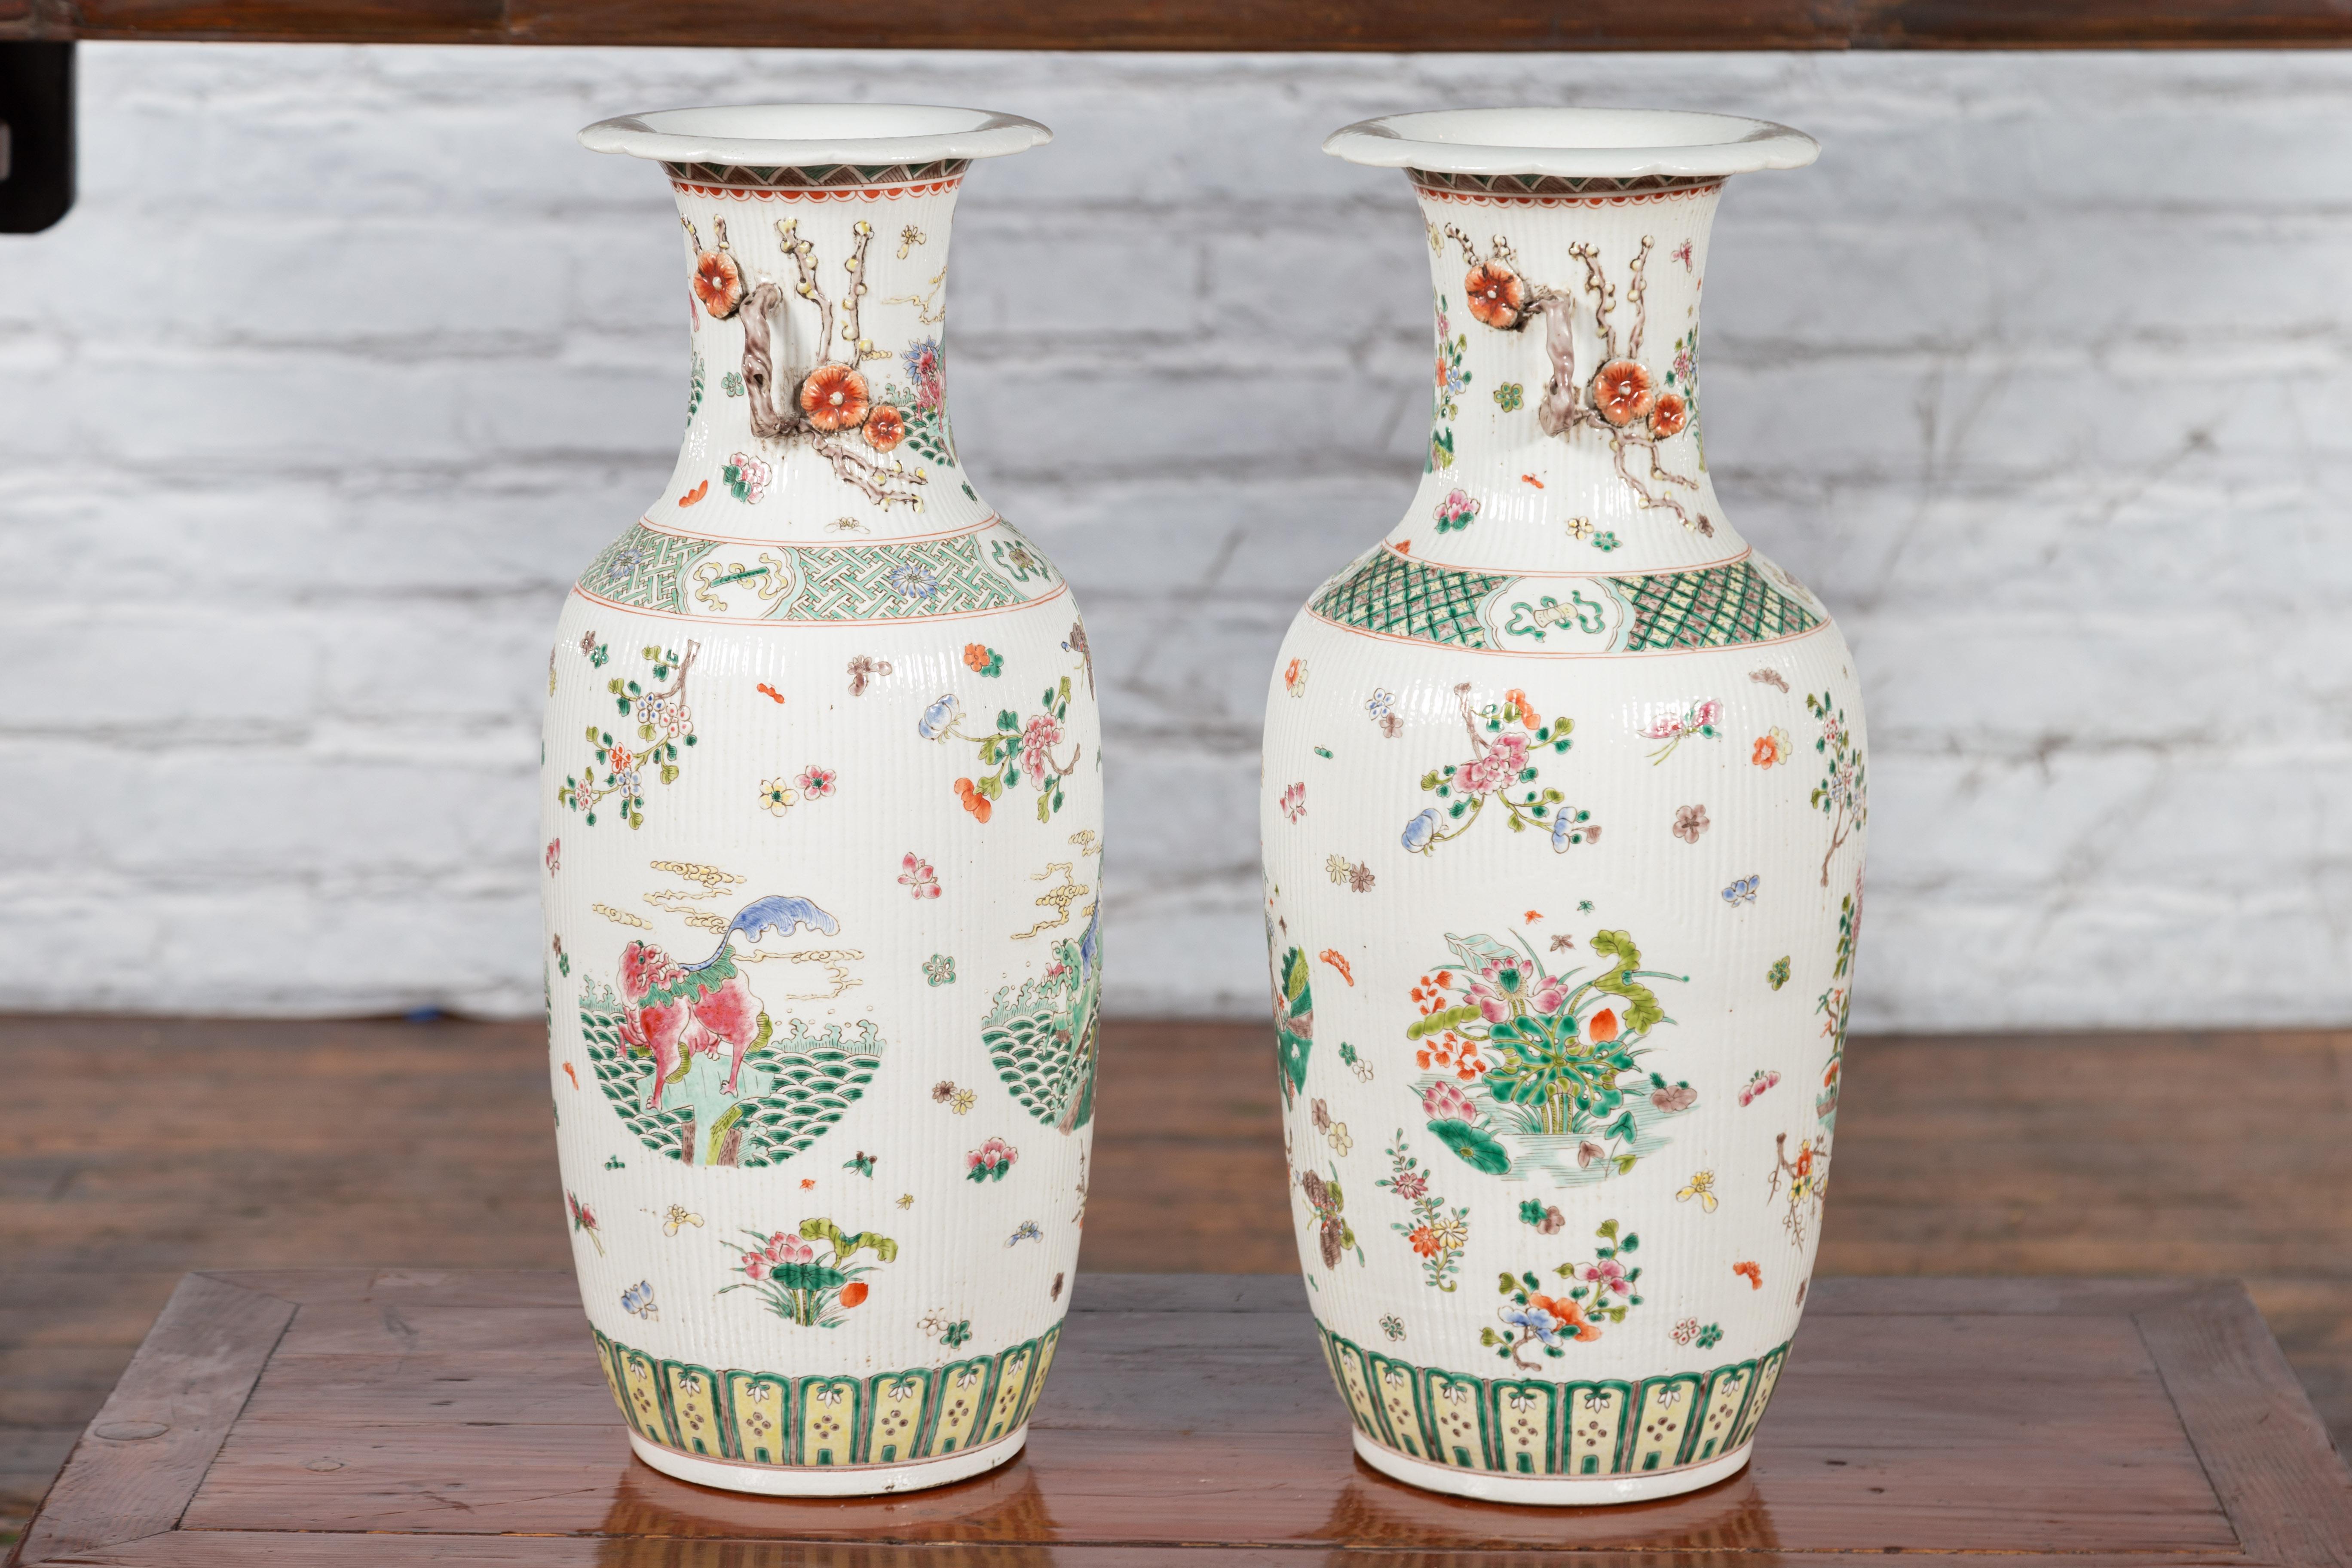 Antique Chinese Porcelain Vases with Hand-Painted Flowers and Mythical Animals 10